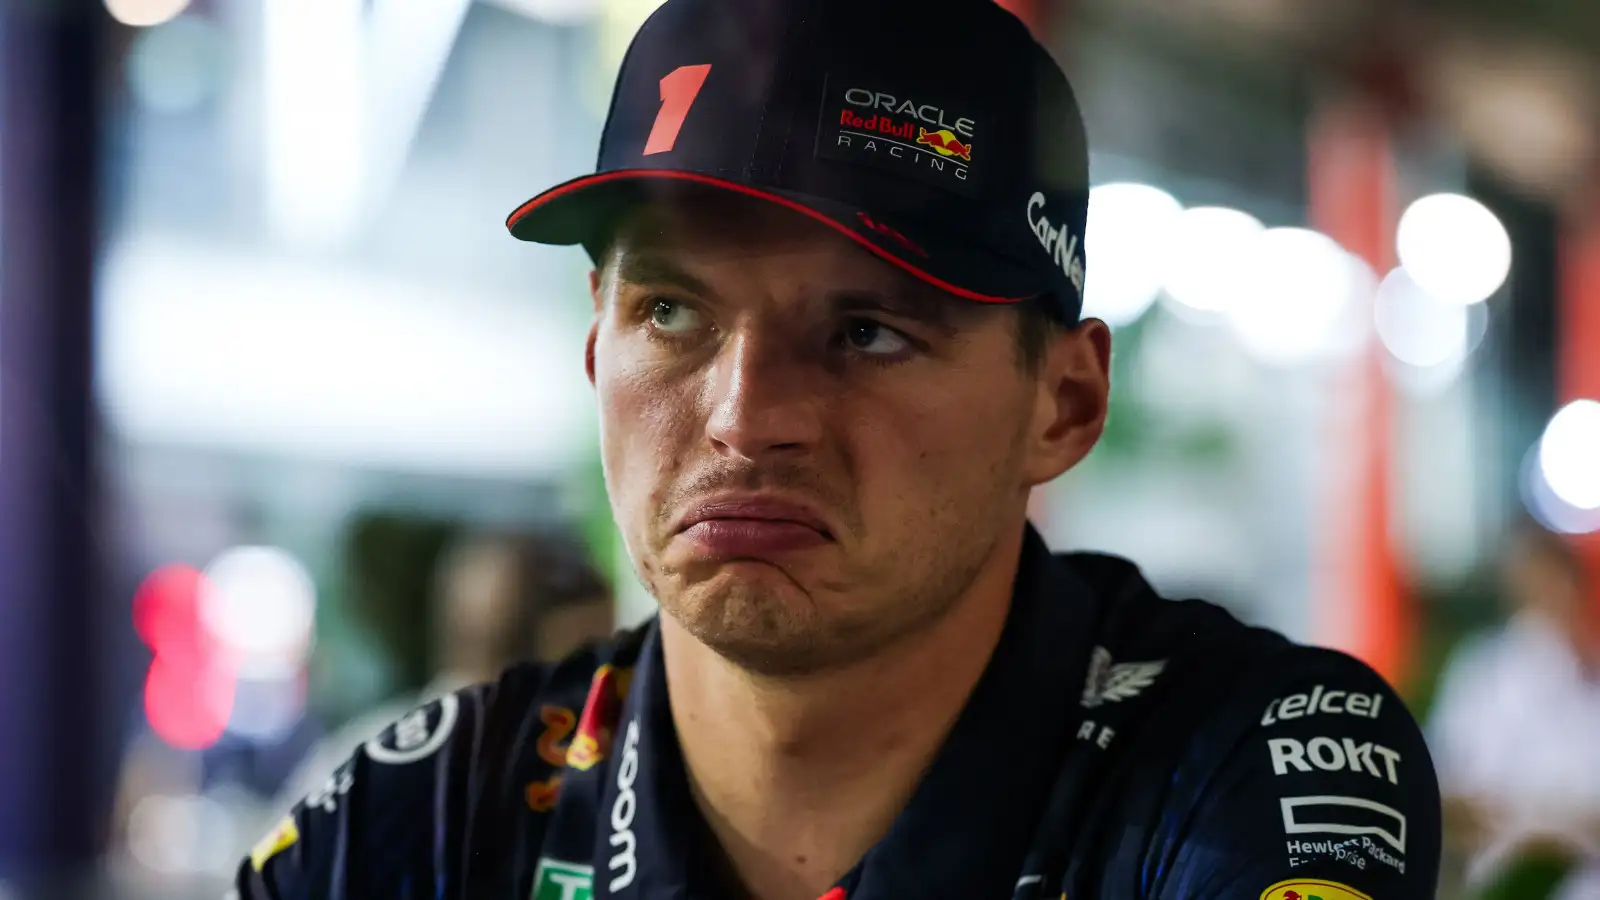 Red Bull driver Max Verstappen pulls an unimpressed face as he is interviewed.